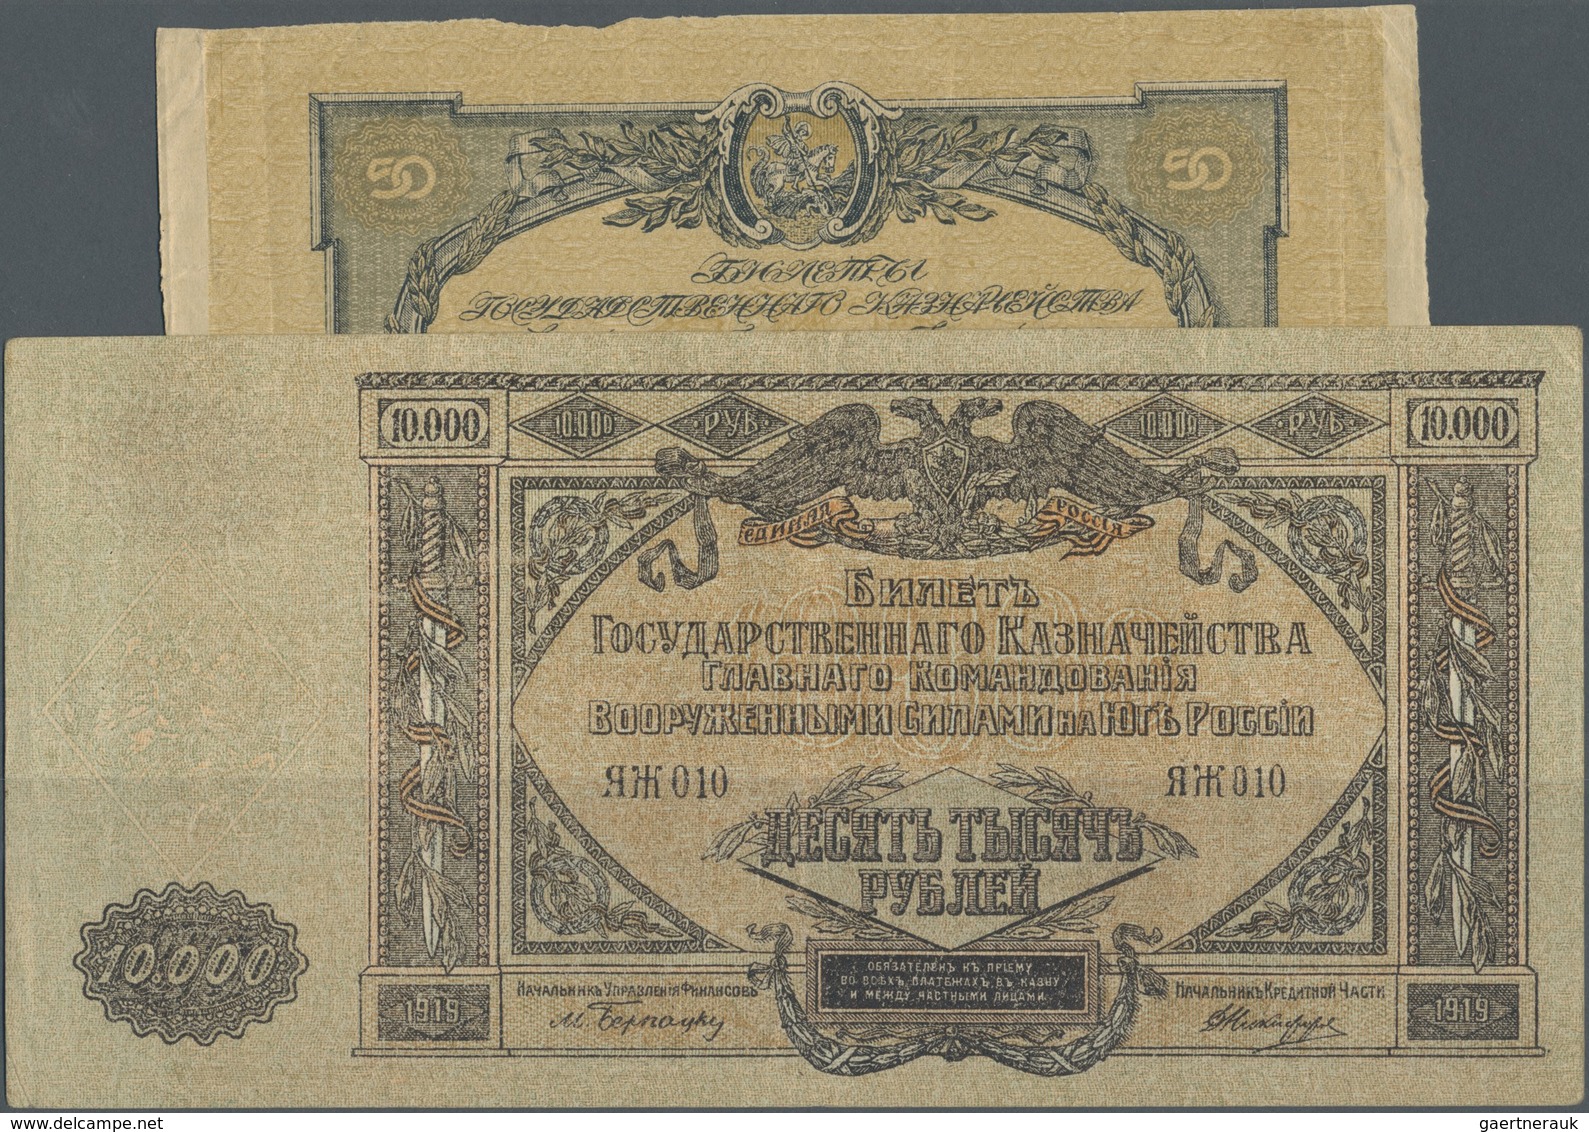 Russia / Russland: Set Of 2 Notes 50 And 10.000 Rubles 1919 P. S422c, 425a The First In Condition F, - Russia